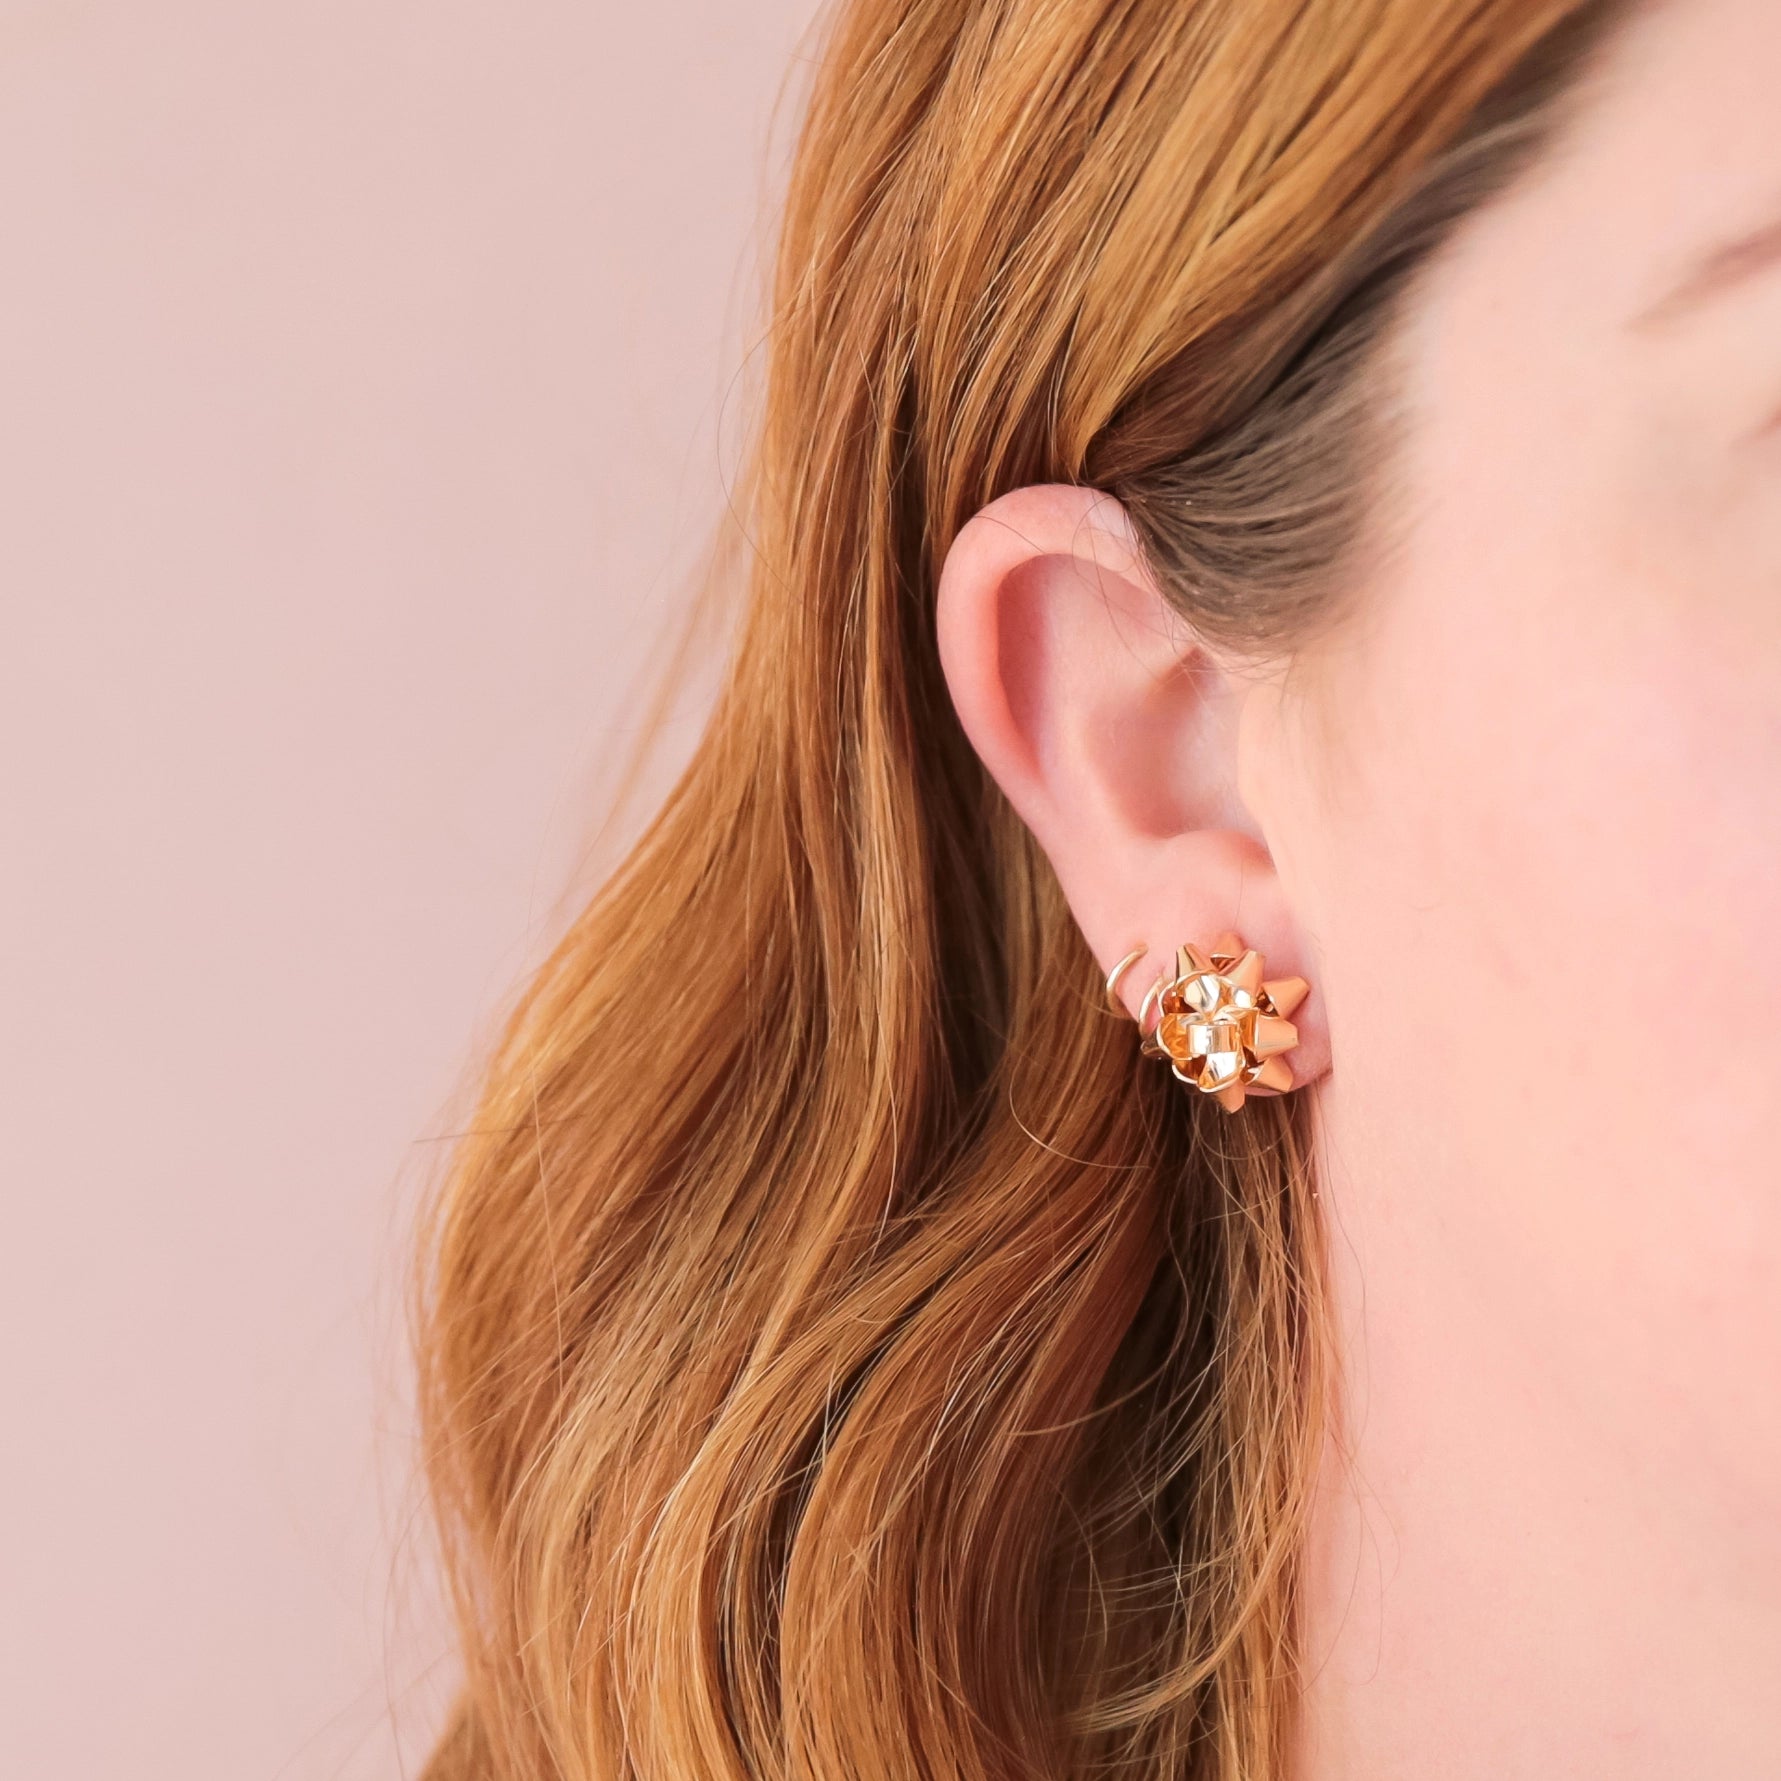 On a peachy background is a model wearing the gold bow earrings.